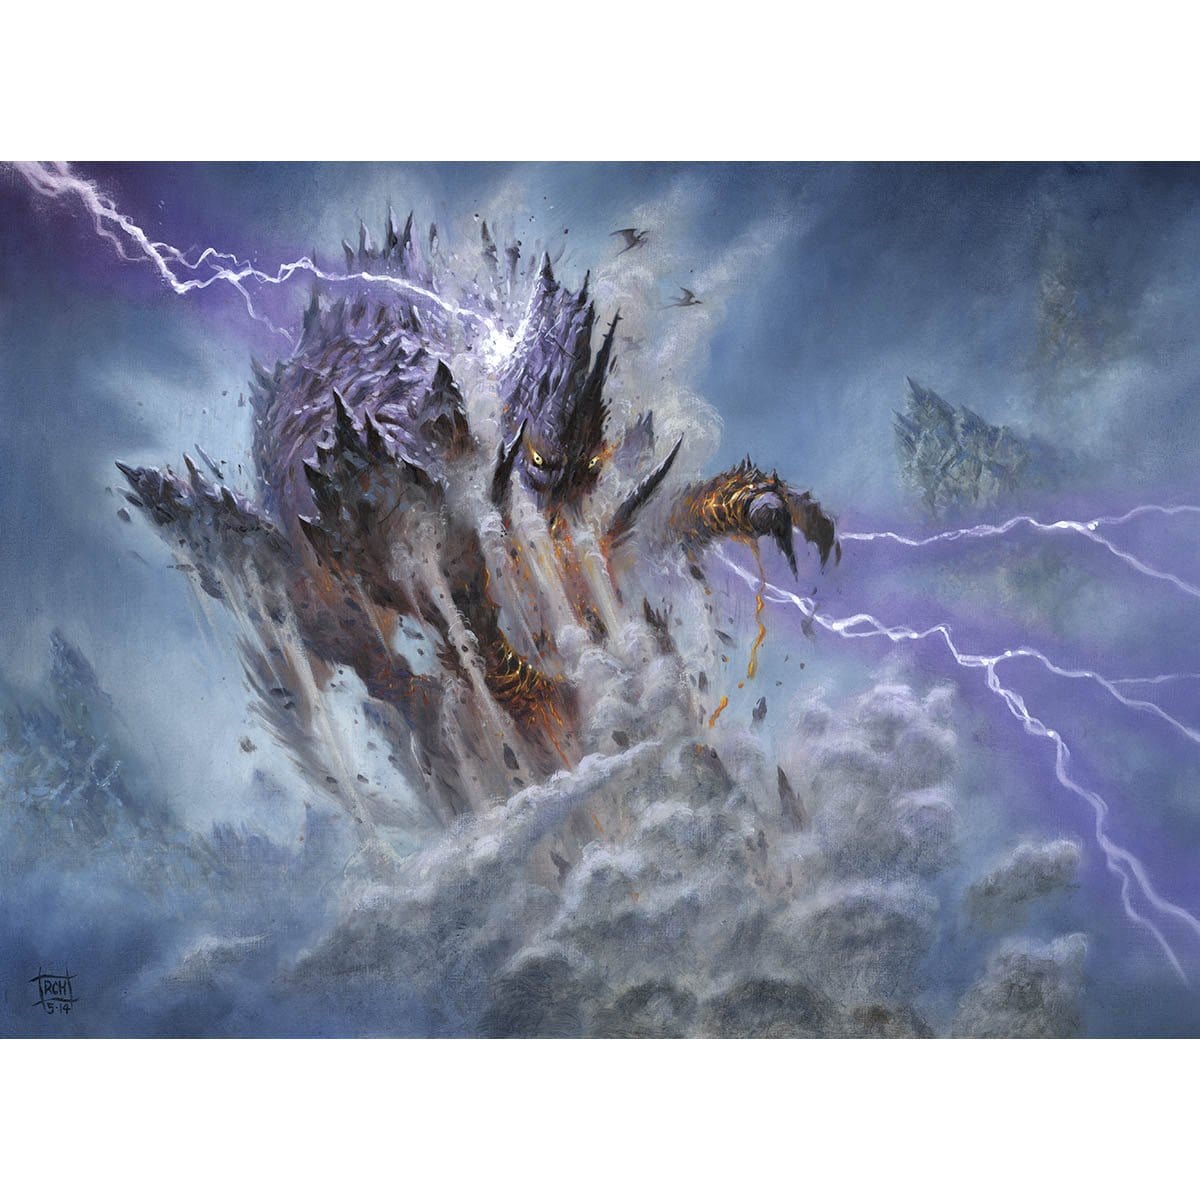 Stormcrag Elemental Print - Print - Original Magic Art - Accessories for Magic the Gathering and other card games